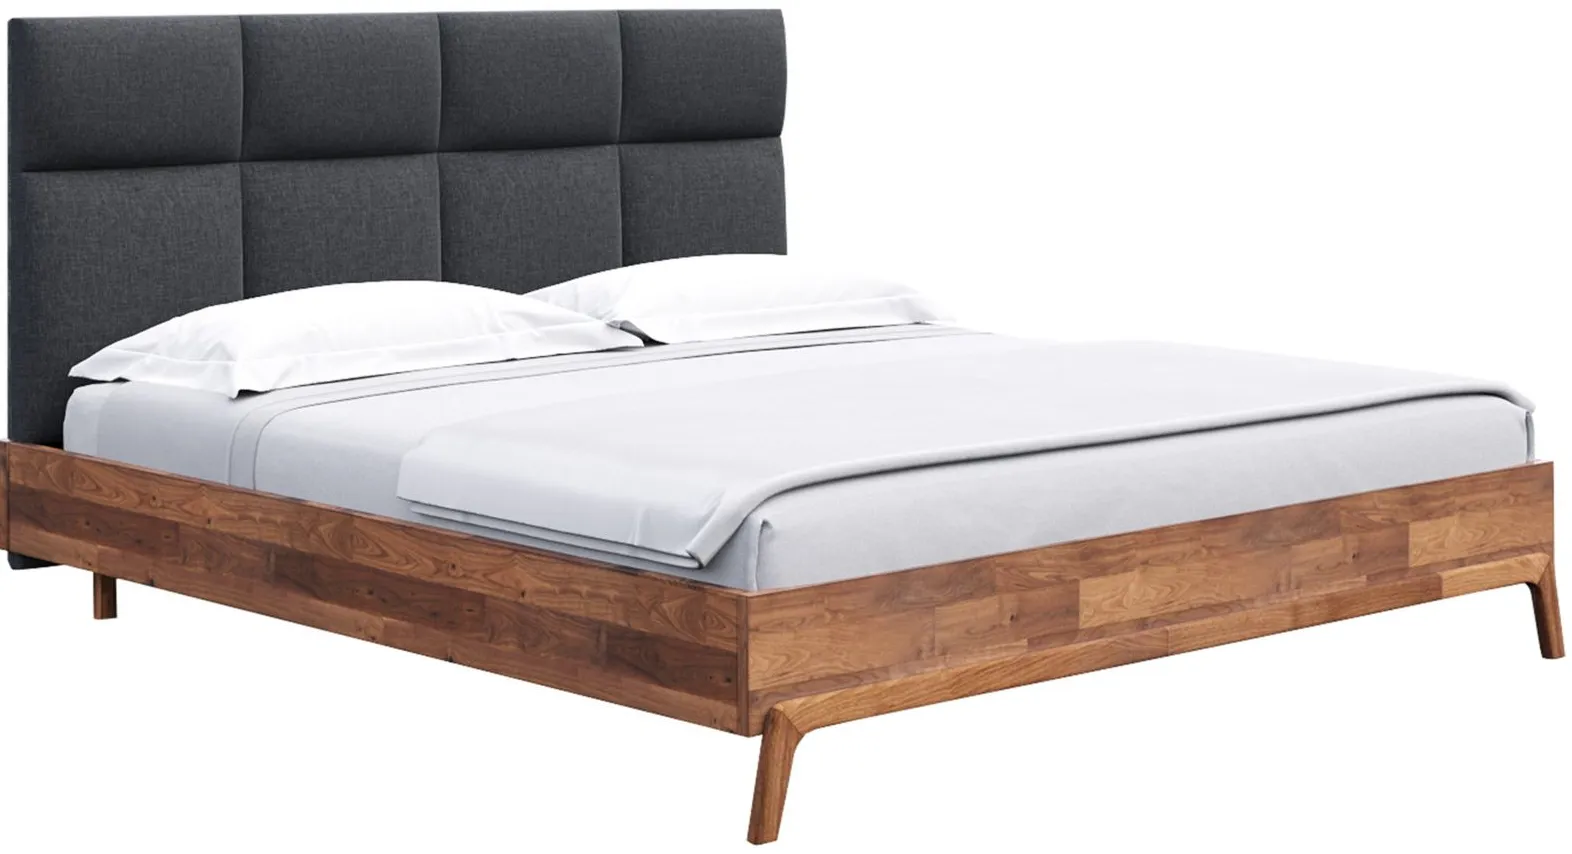 Remix Upholstered Bed in Grey, Brown by LH Imports Ltd